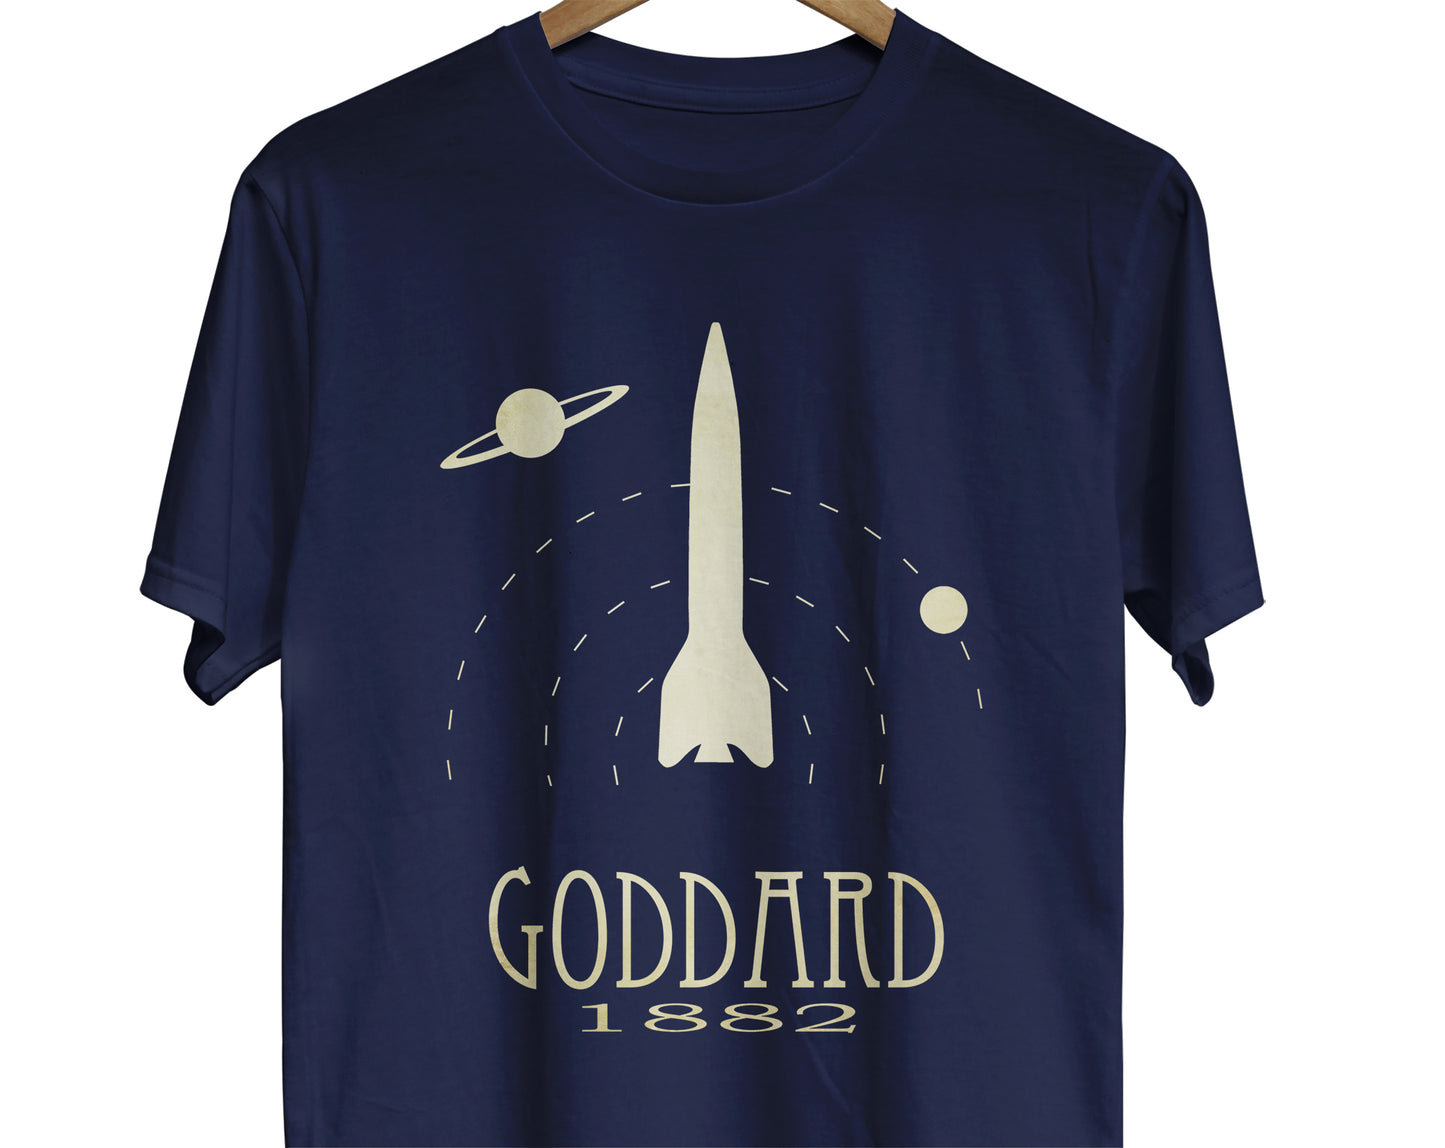 Space t-shirt for Robert H. Goddard the father of modern rocketry